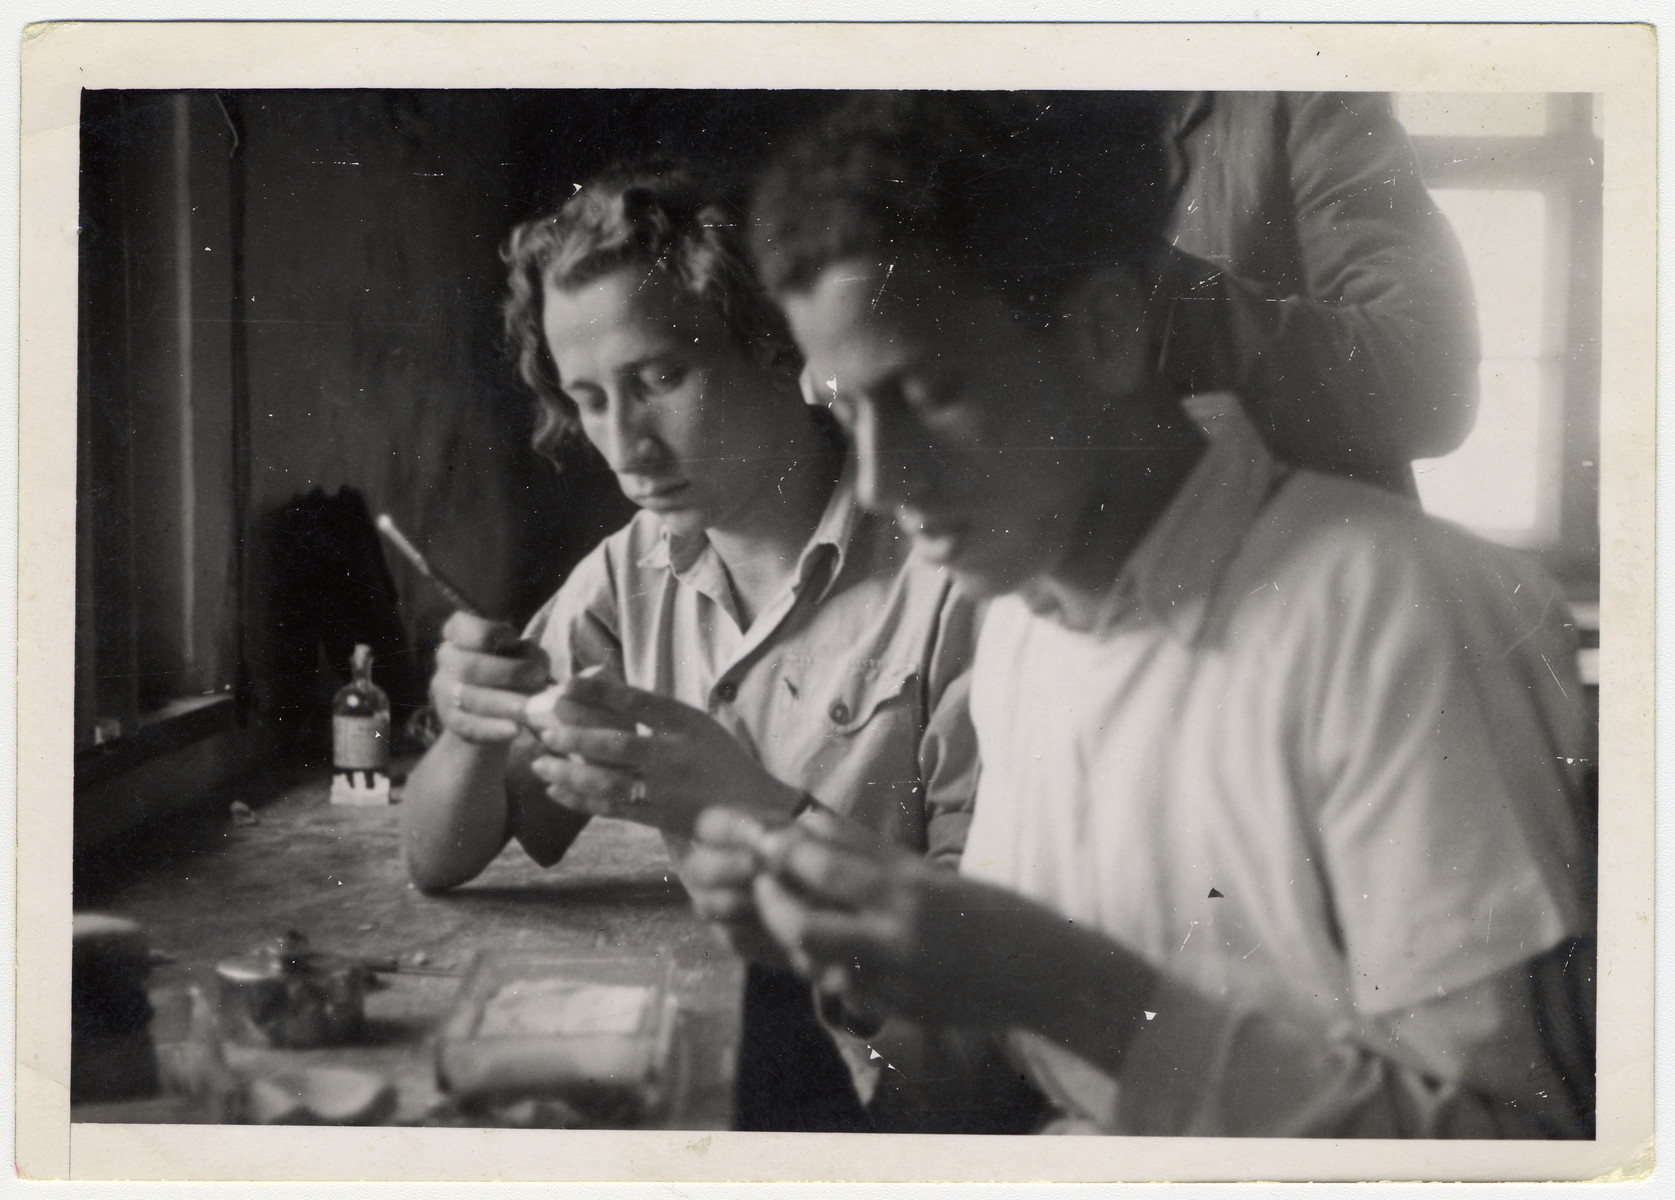 Two young men practice dentistry in the ORT dental technicians school in the Bergen-Belsen displaced persons camp.